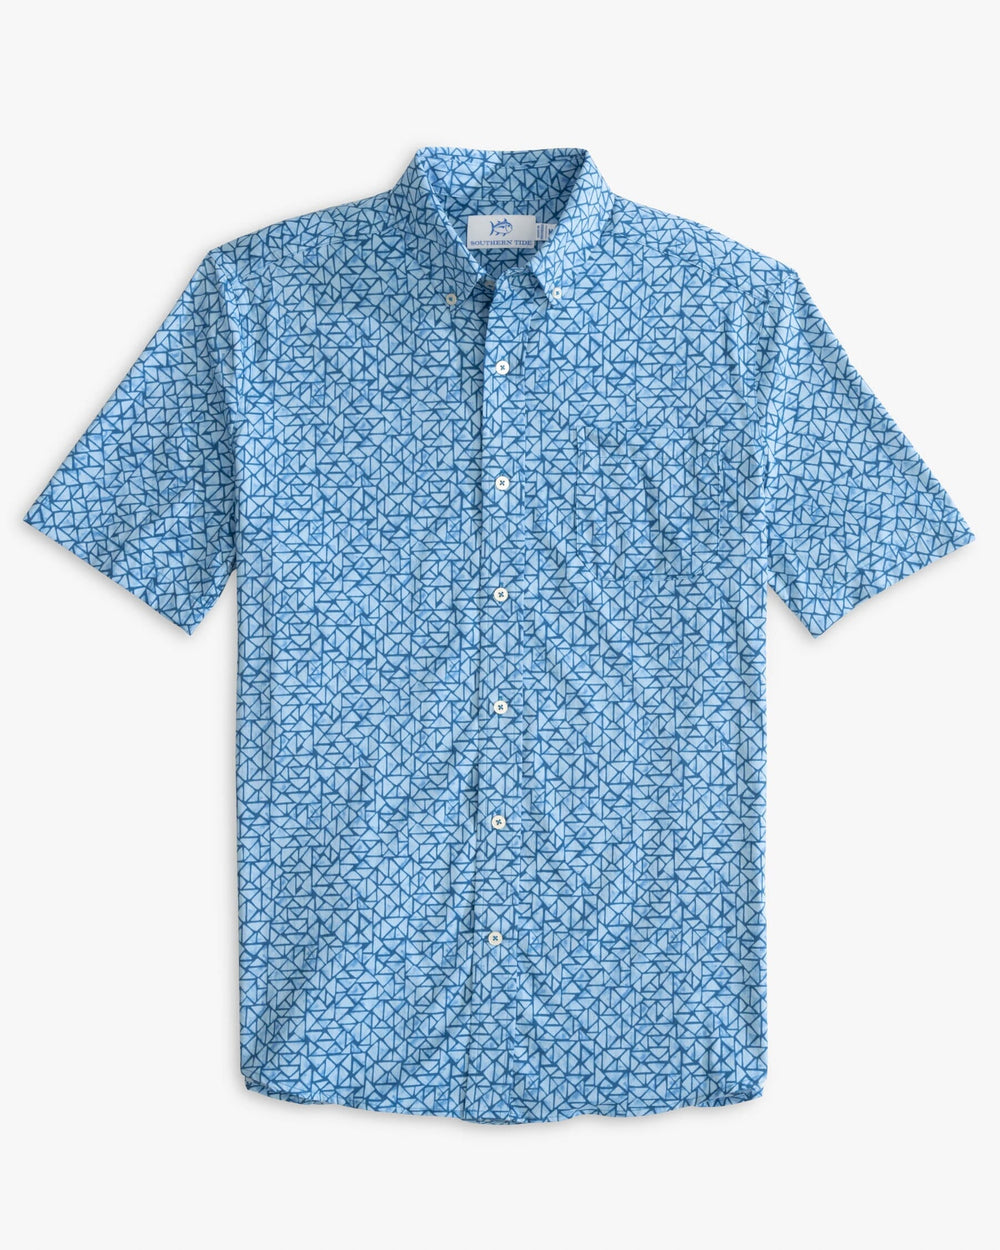 The front view of the Southern Tide Saturday Soiree Intercoastal Short Sleeve Button Down Shirt by Southern Tide - Atlantic Blue